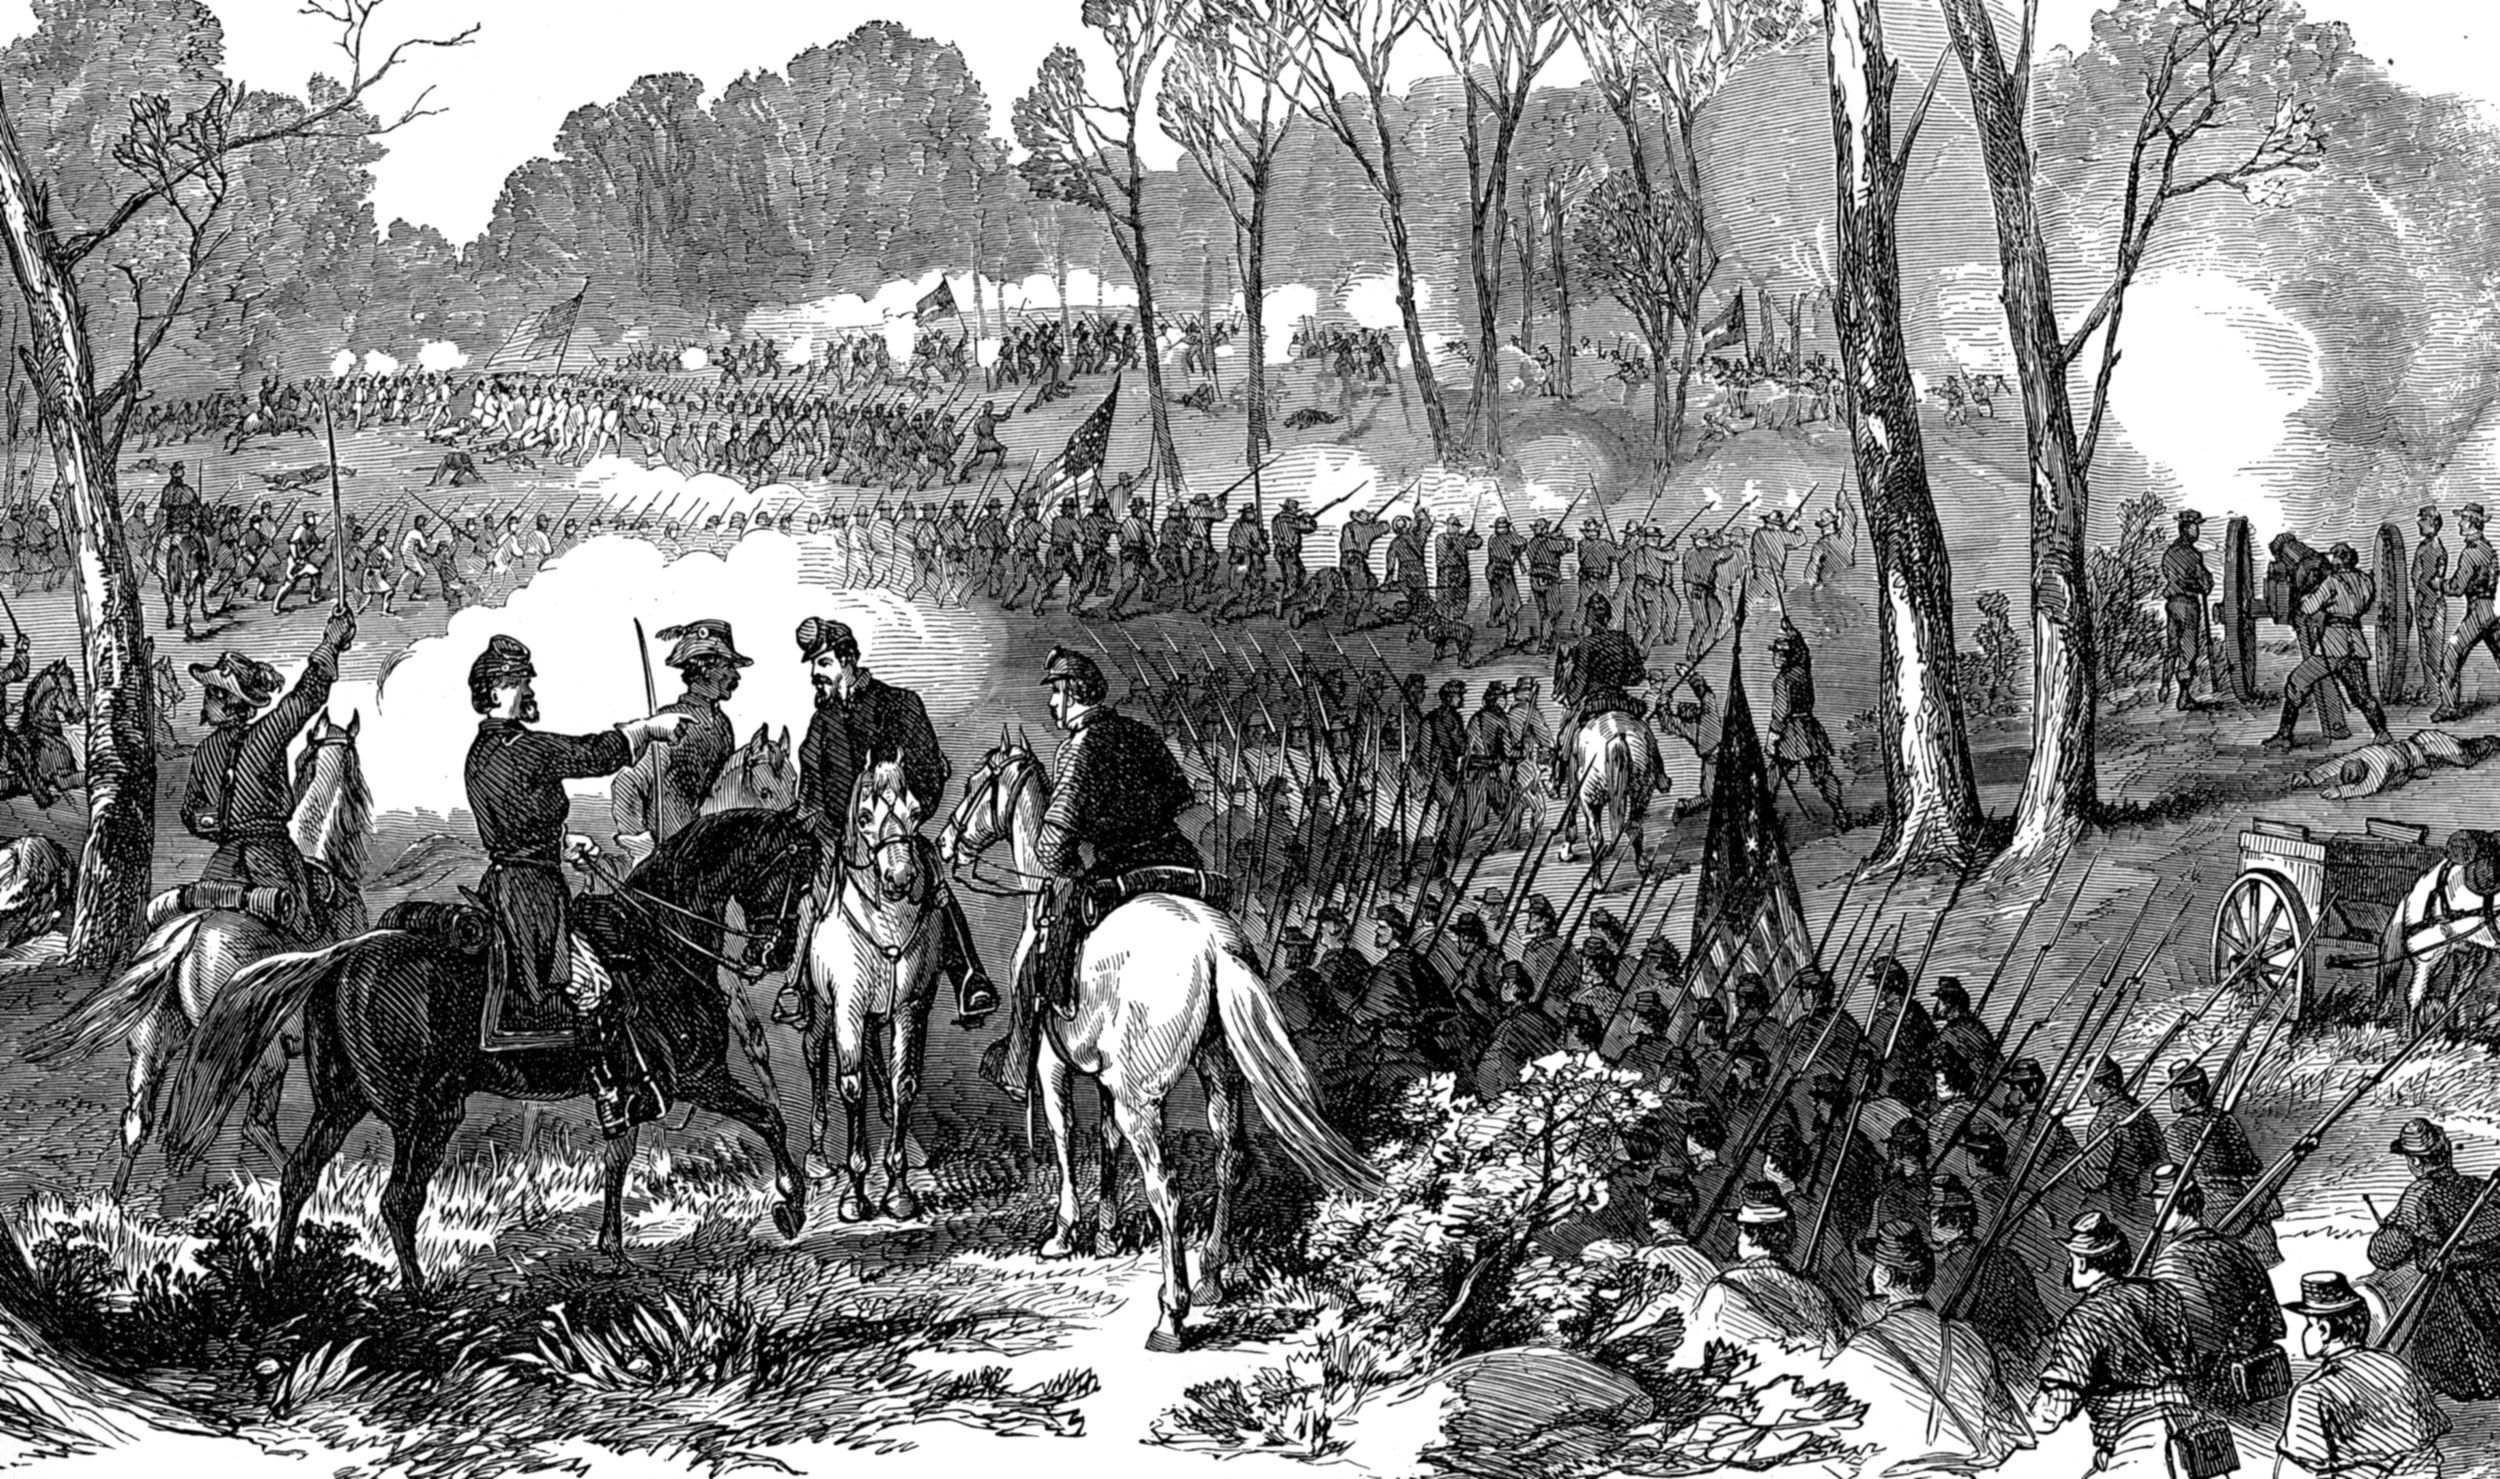 Pea Ridge fighting from the Union perspective, as depicted in Frank Leslie’s Illustrated Weekly.